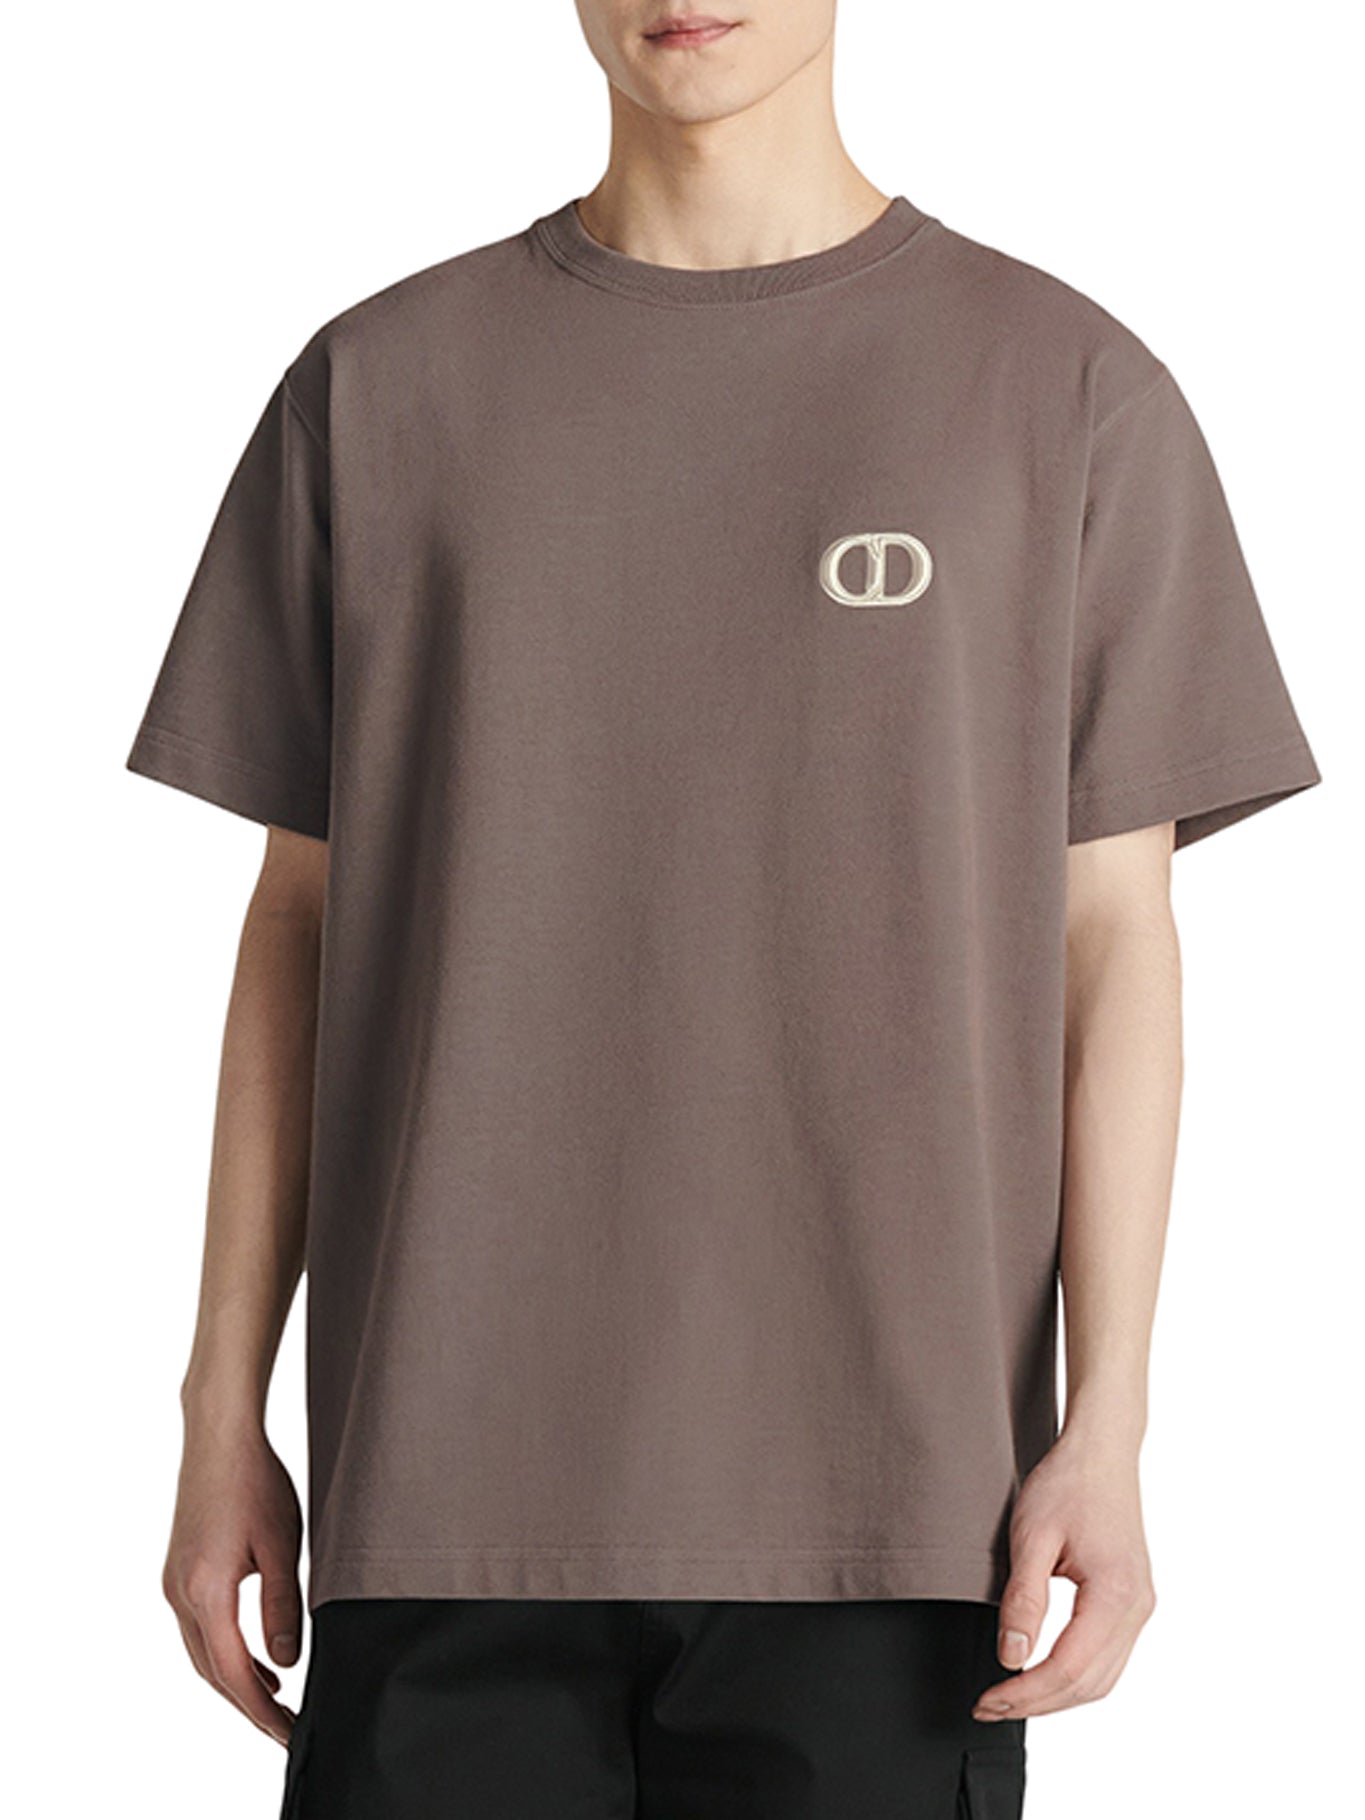 CD ICON T-SHIRT WITH COMFORTABLE FIT